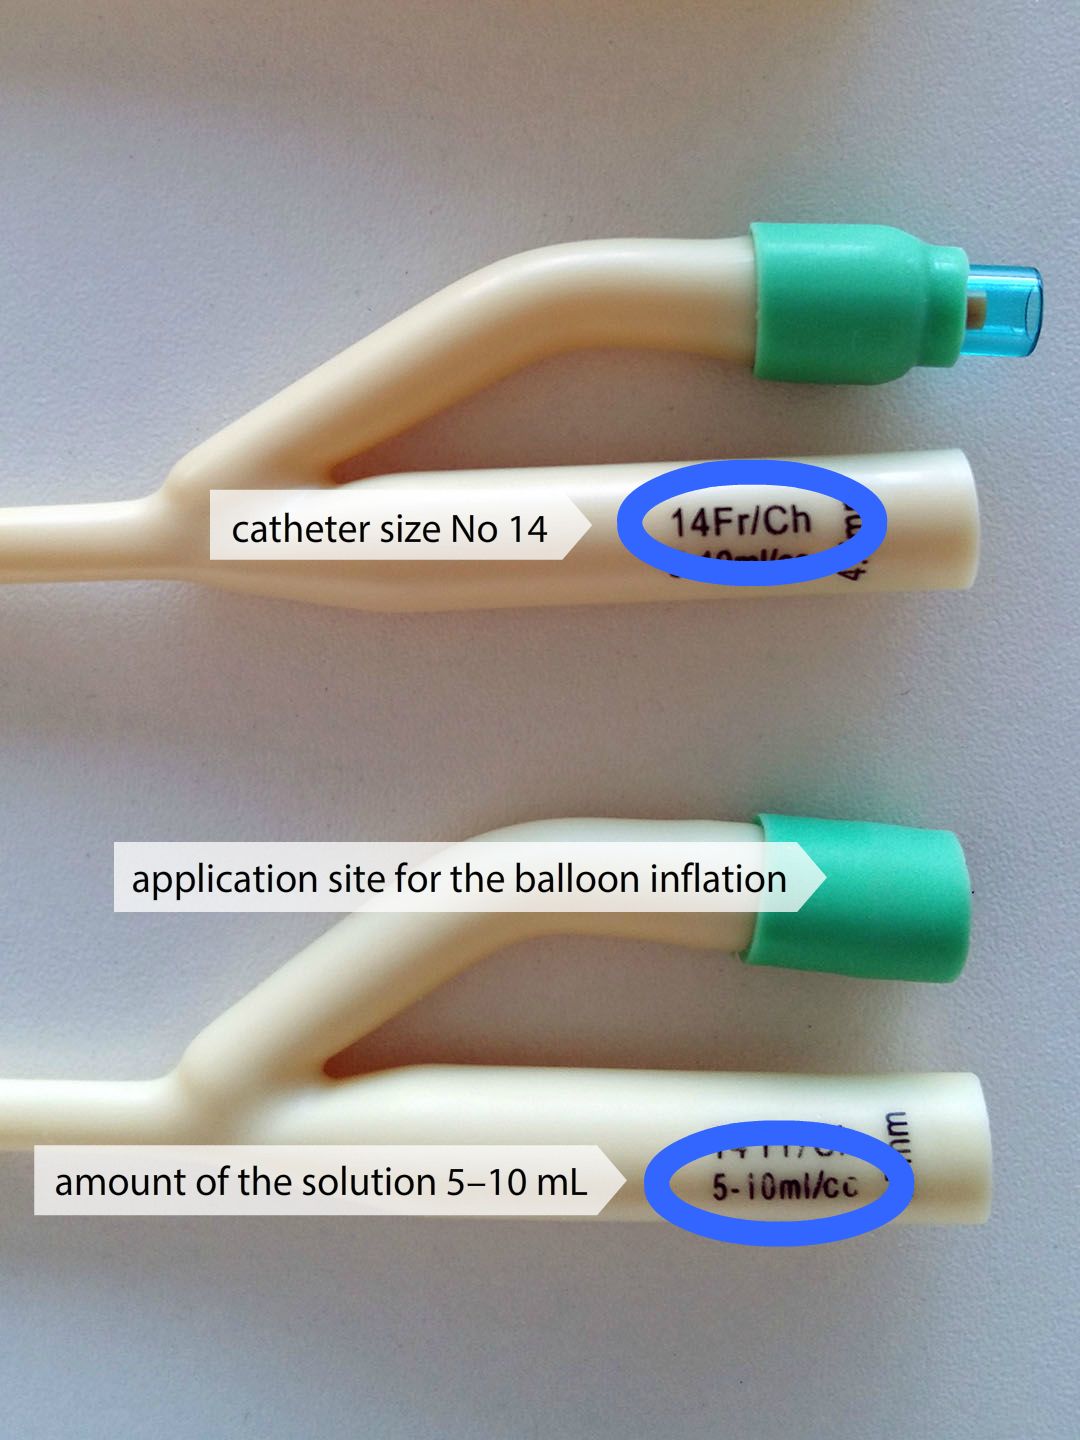 Indications on urinary catheters